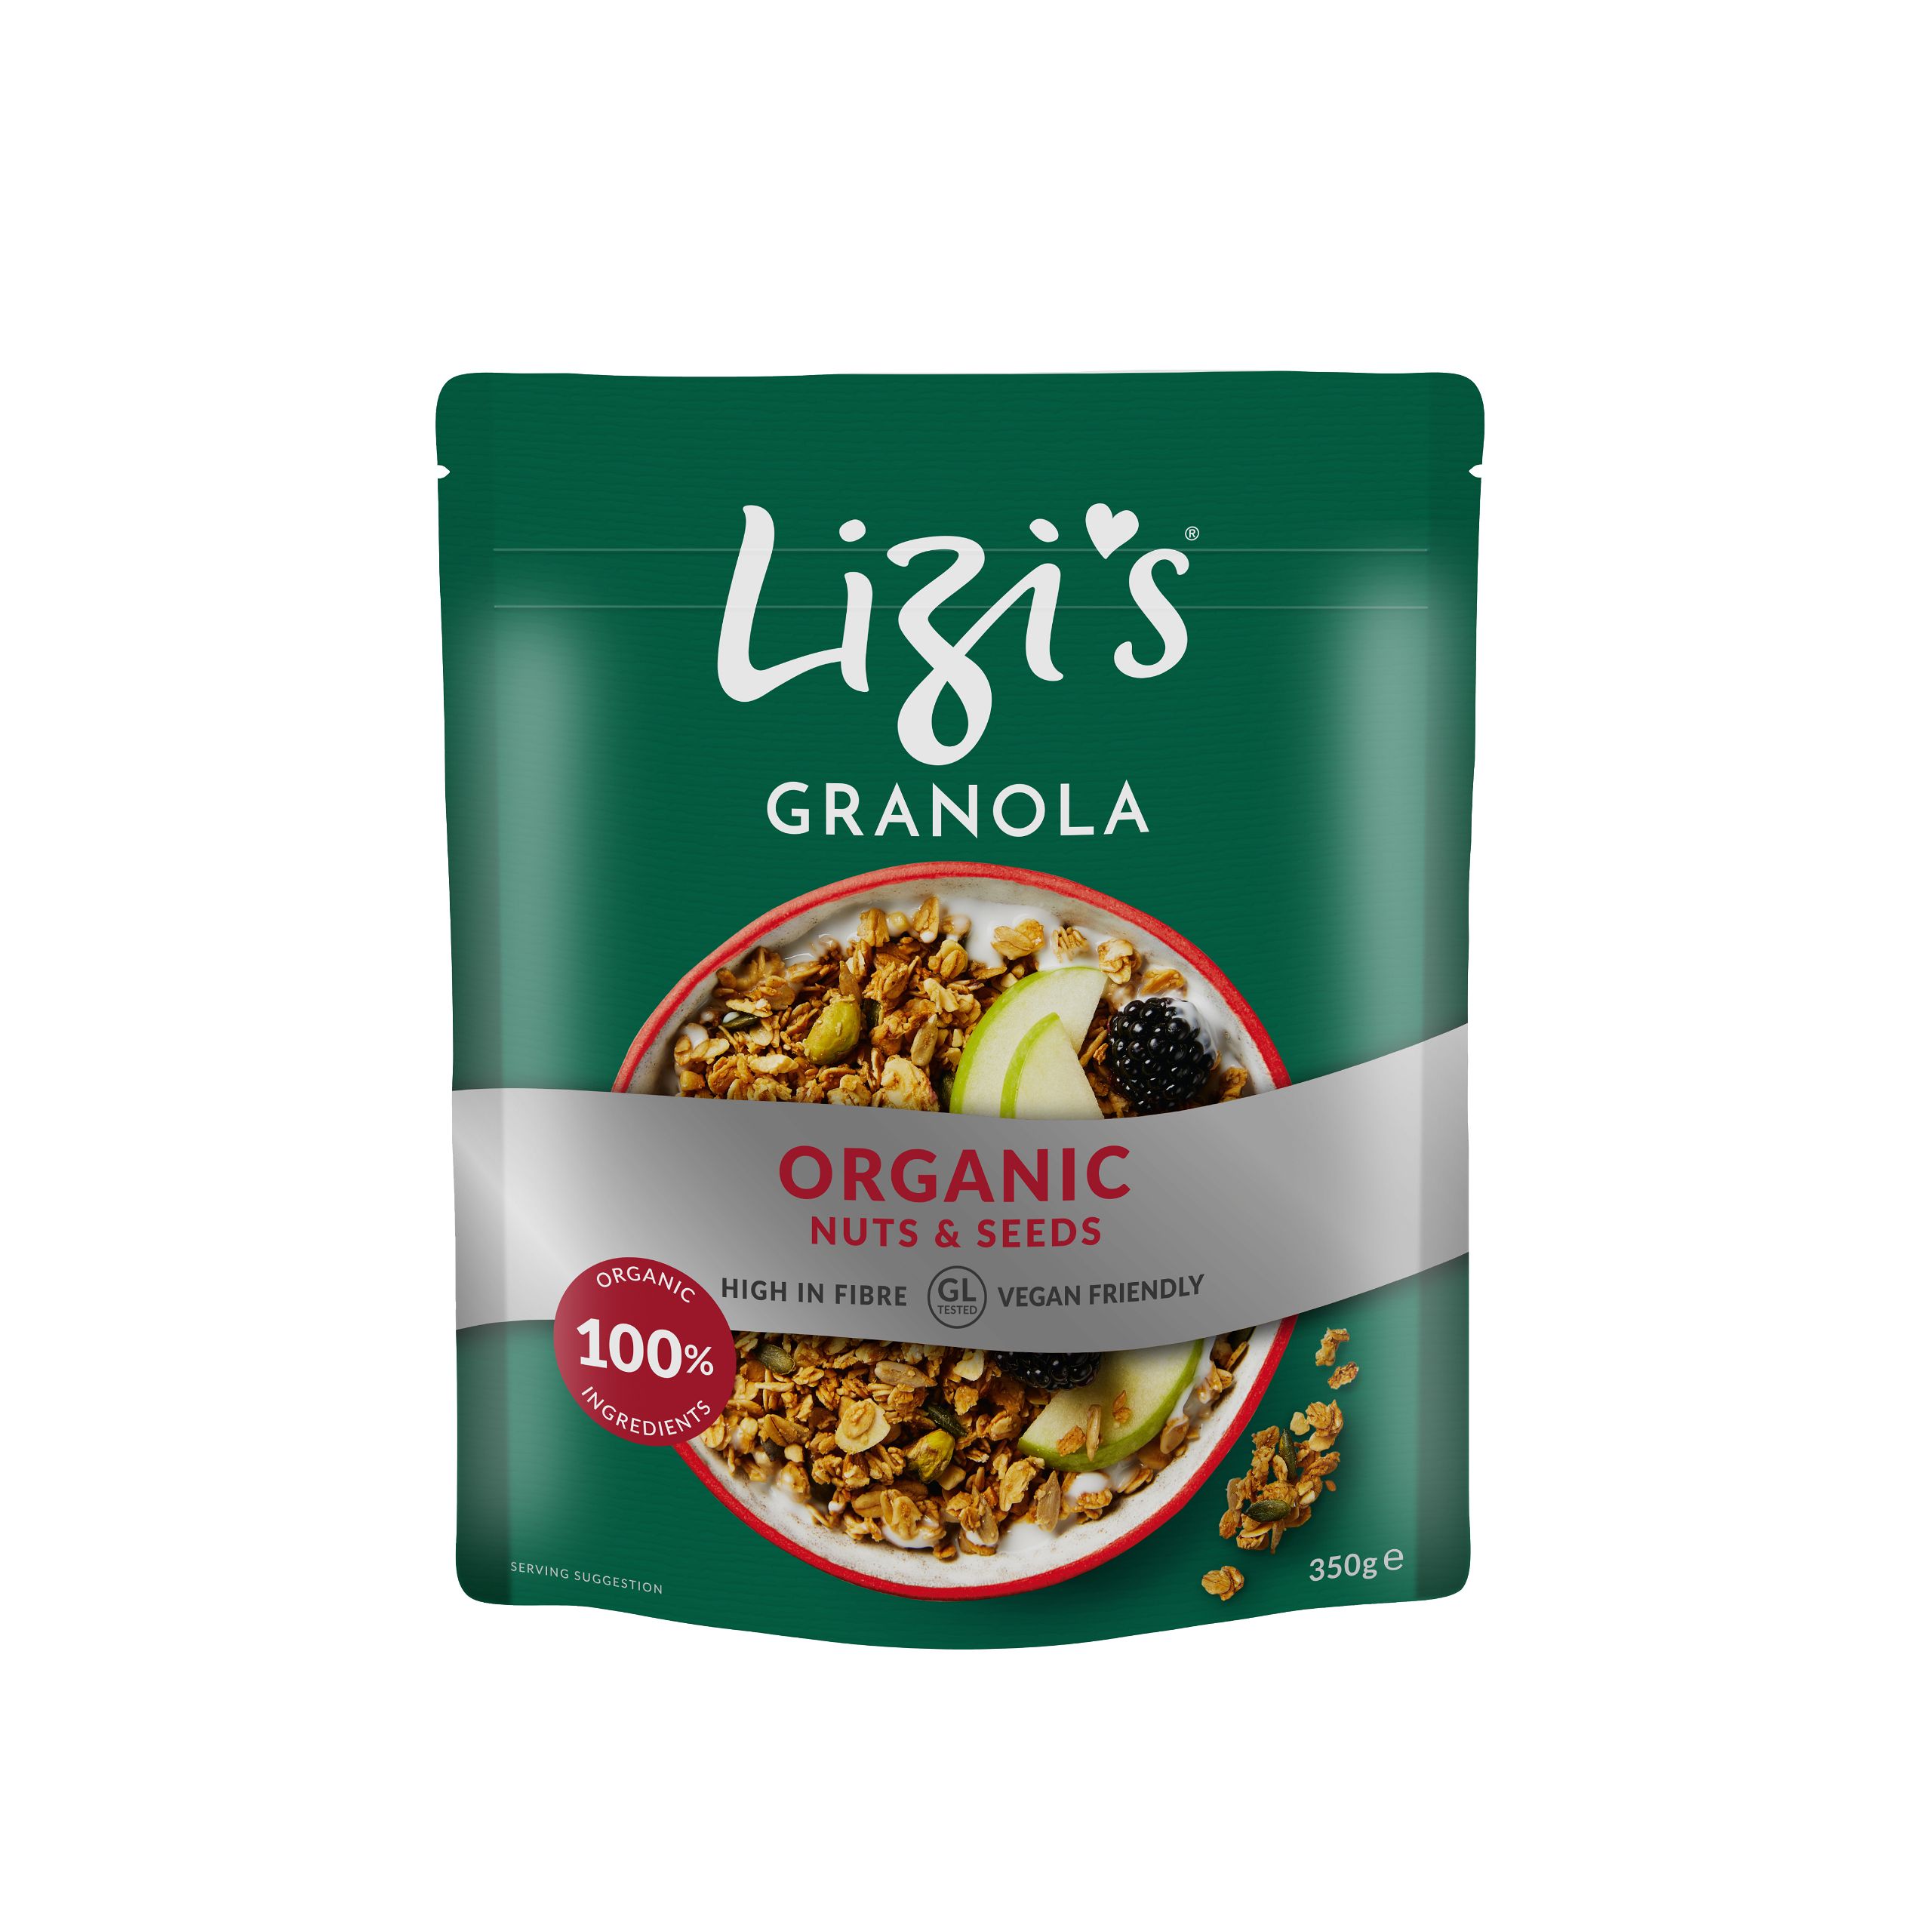 Organic Nuts and Seeds Granola - Image